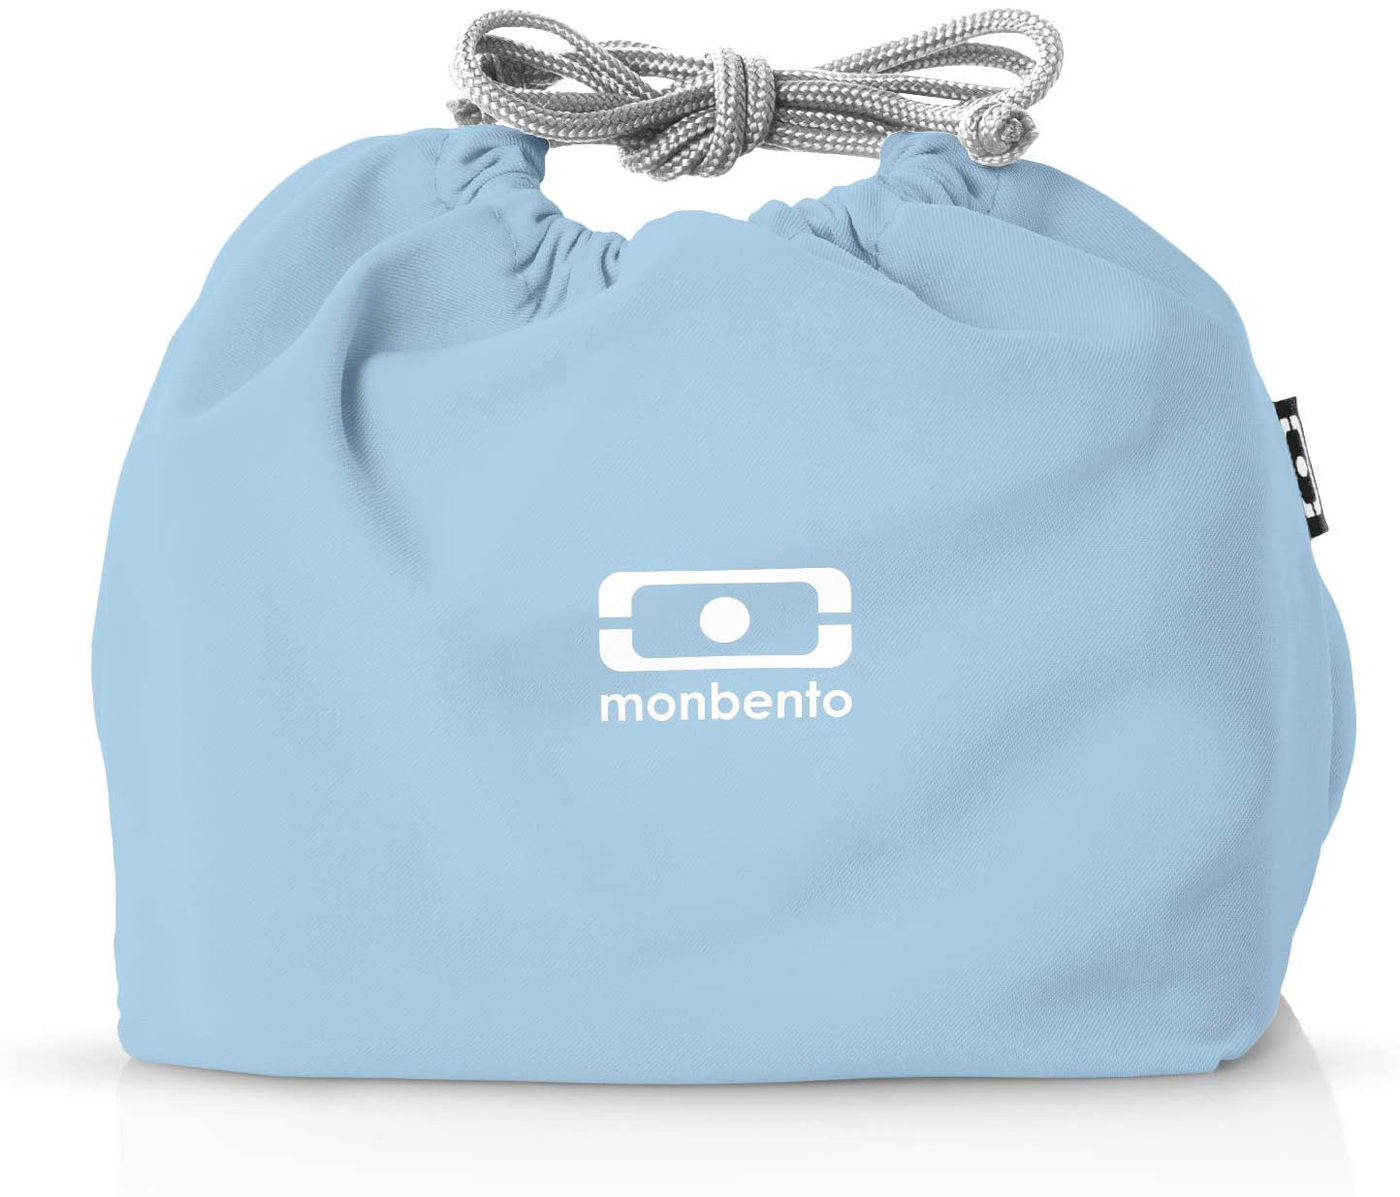 monbento - MB Pochette M blue Crystal Bento lunch bag - Polyester lunch tote - Suitable for MB Original MB Square & MB Tresor Bento boxes